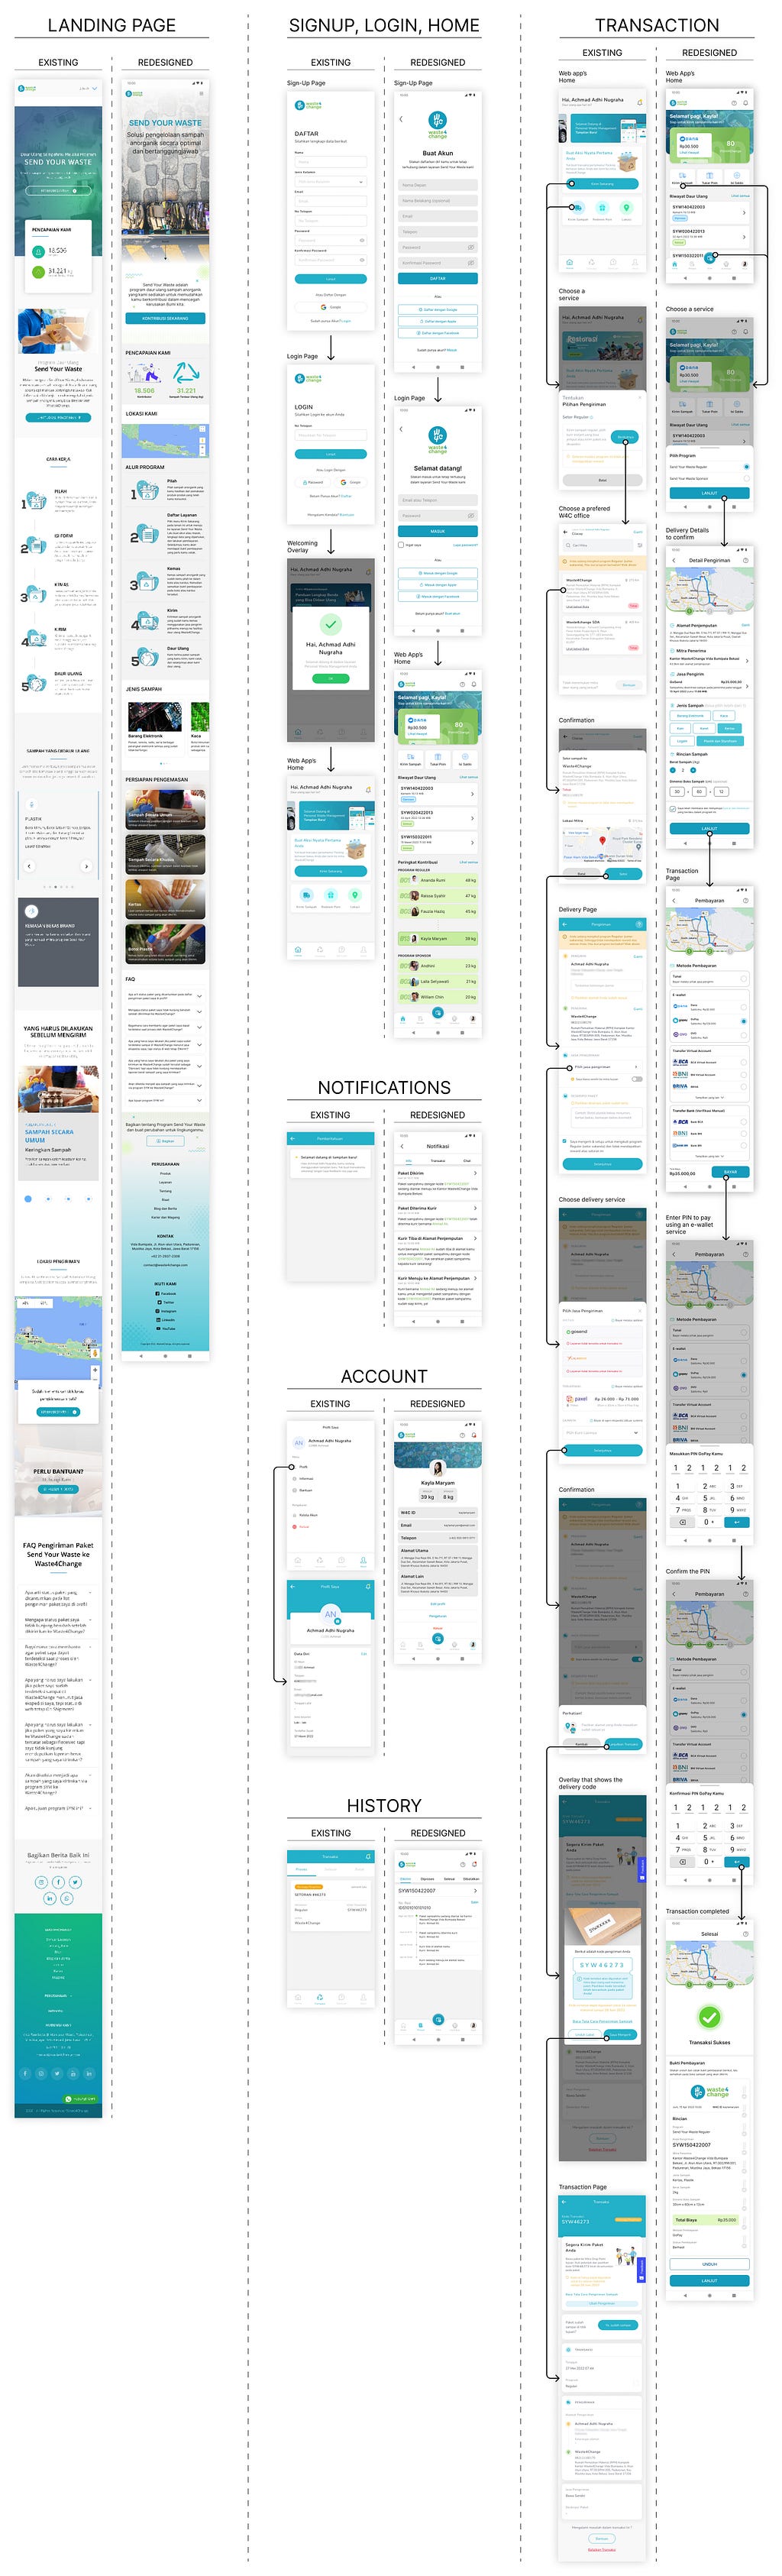 Comparisons between the UI design of the existing platform of Waste4Change and the redesigned one.